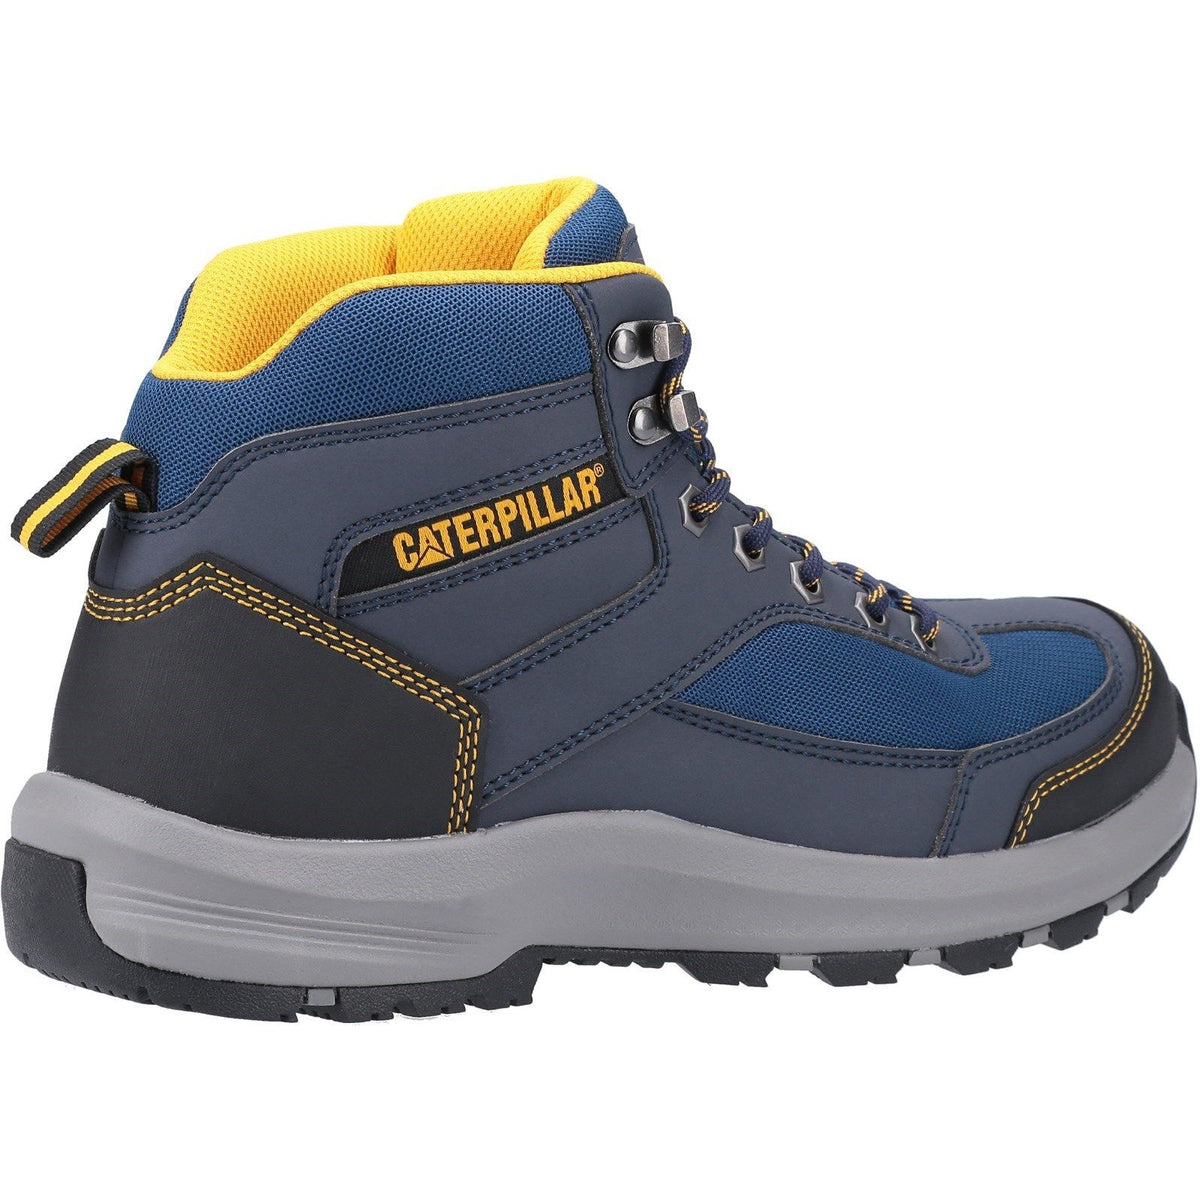 Caterpillar NEW Elmore S1P Wide-Fitting Safety Hiker with Steel Toe Ca ...